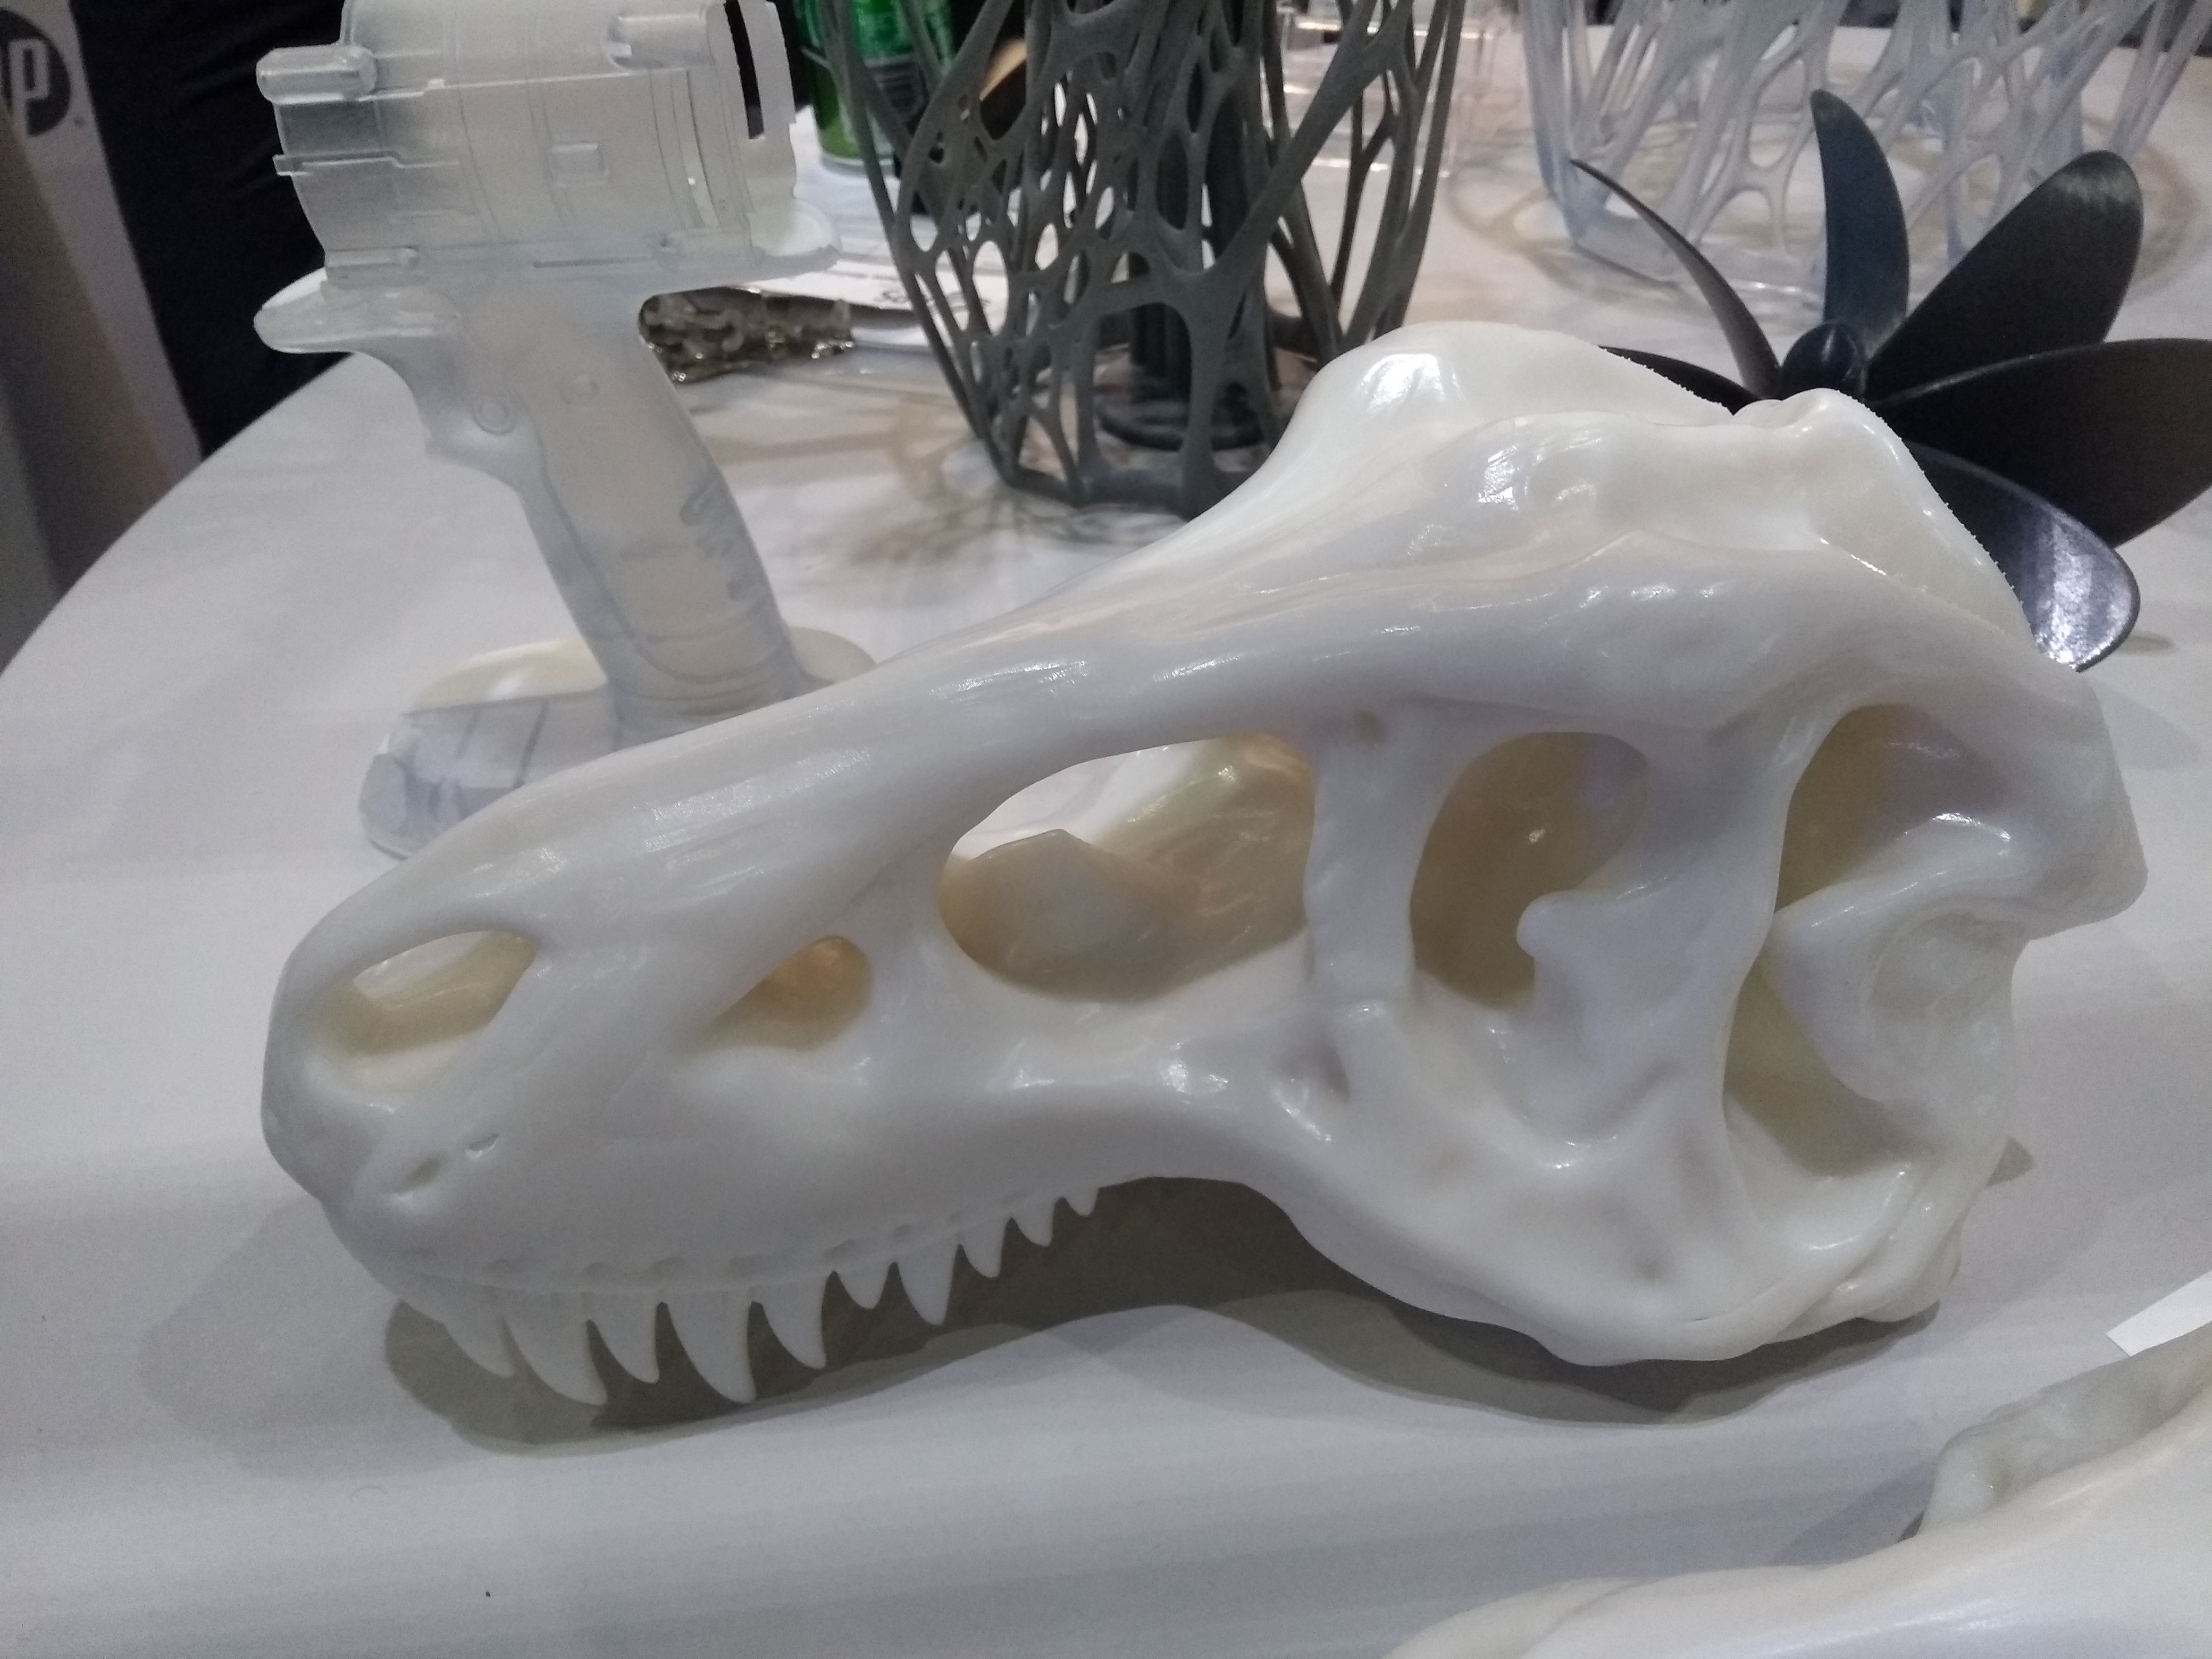 A large-scale 3D printed skull made with resin using the NEO800 3D printer from RPS.